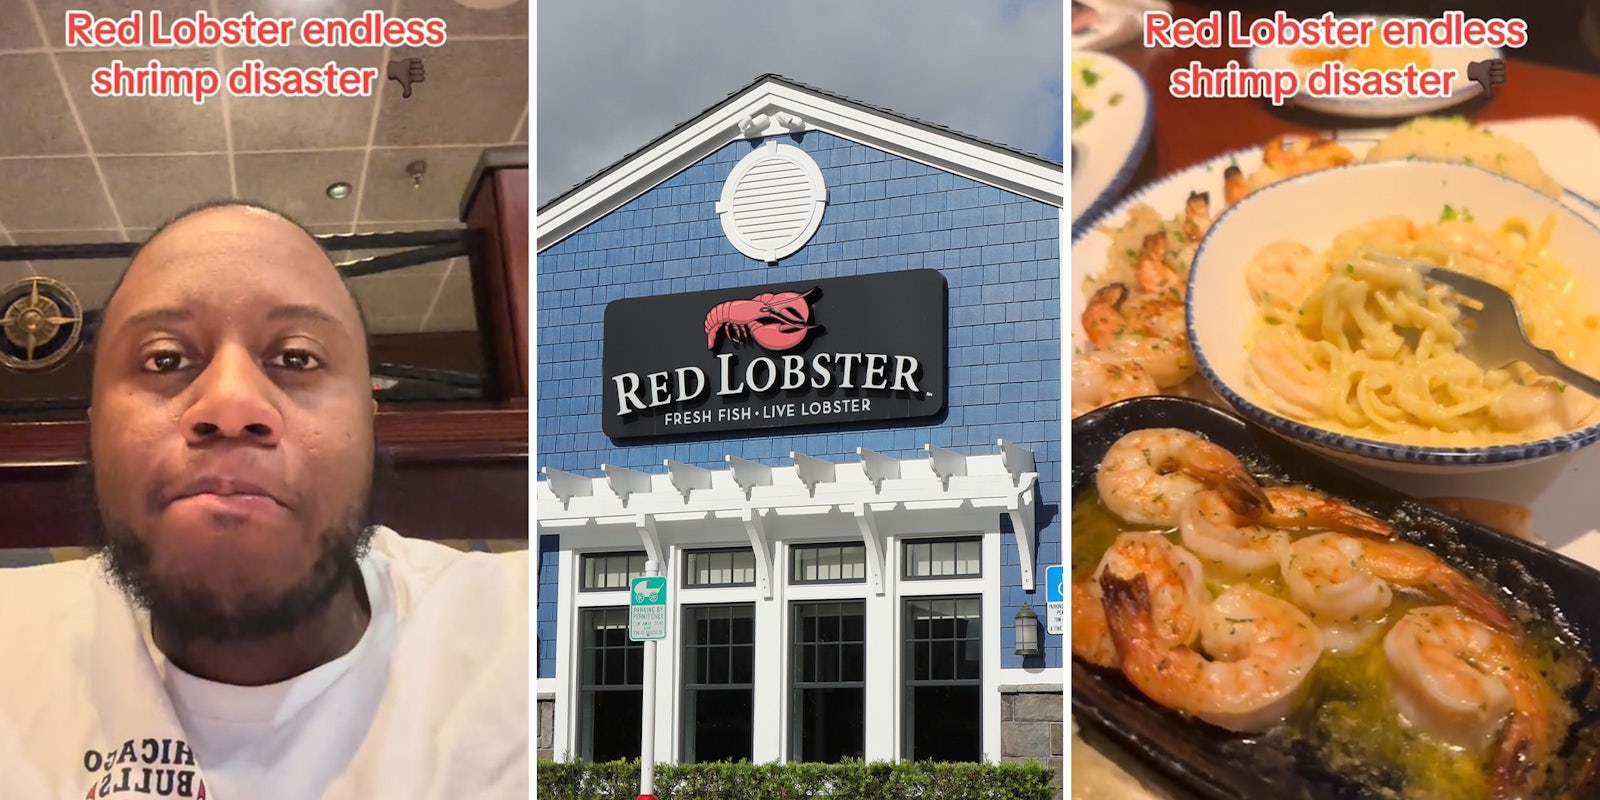 Red Lobster customers say the restaurant profiled them during Endless Shrimp